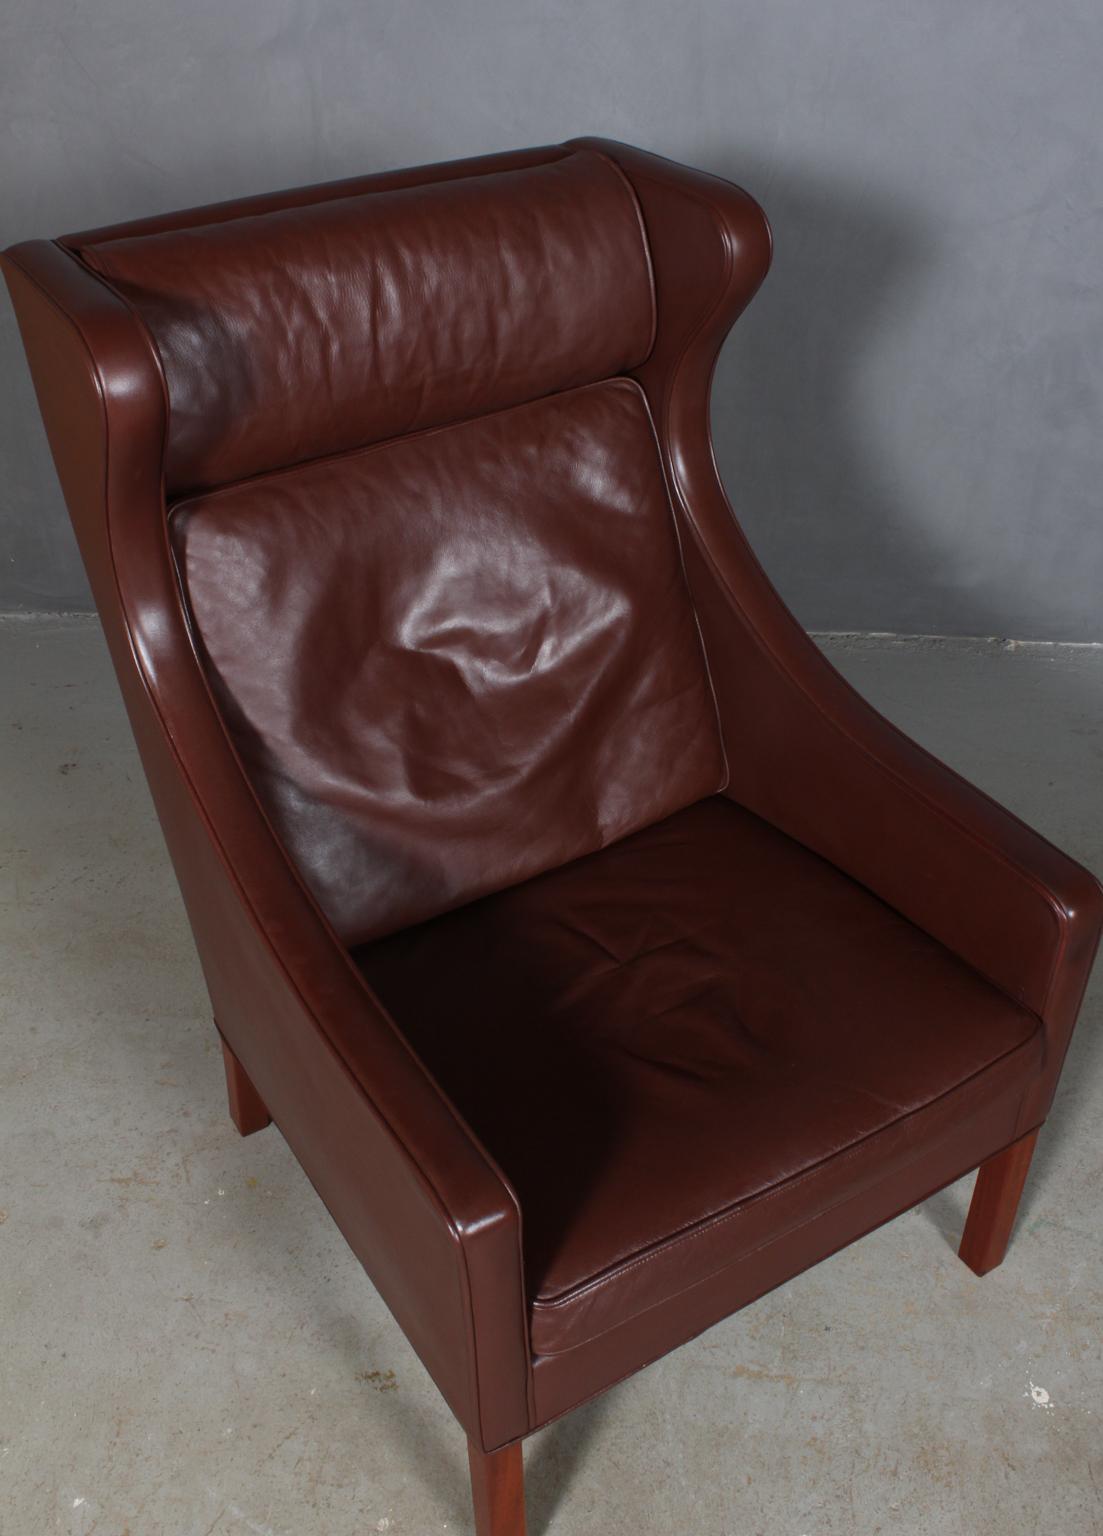 Børge Mogensen wing back chair in original brown patinated leather upholstery.

Legs in teak.

Model 2204, made by Fredericia Furniture.

  